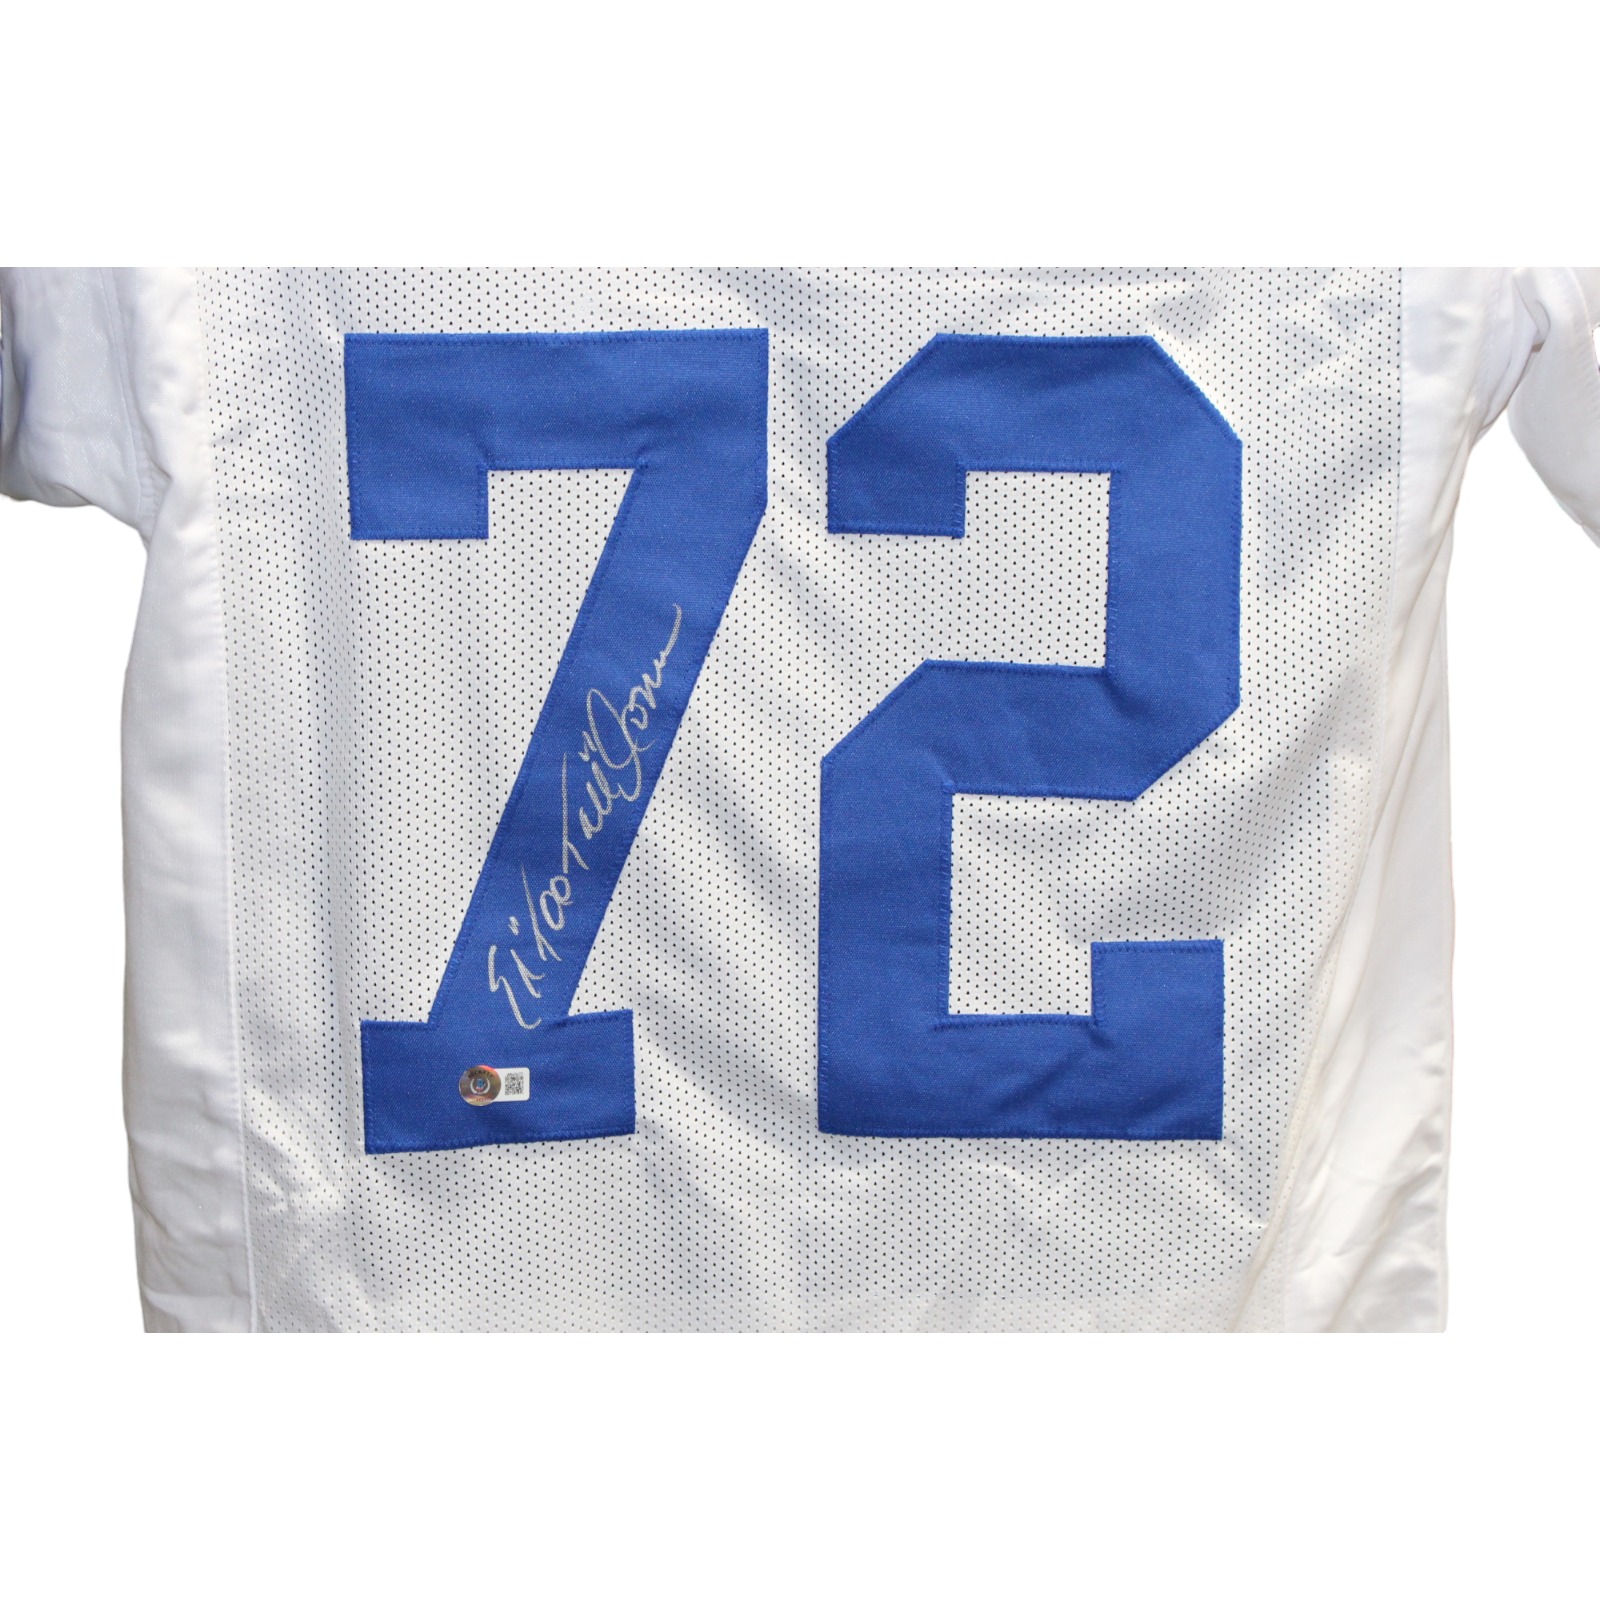 Ed Too Tall Jones Autographed/Signed Pro Style White Jersey Beckett